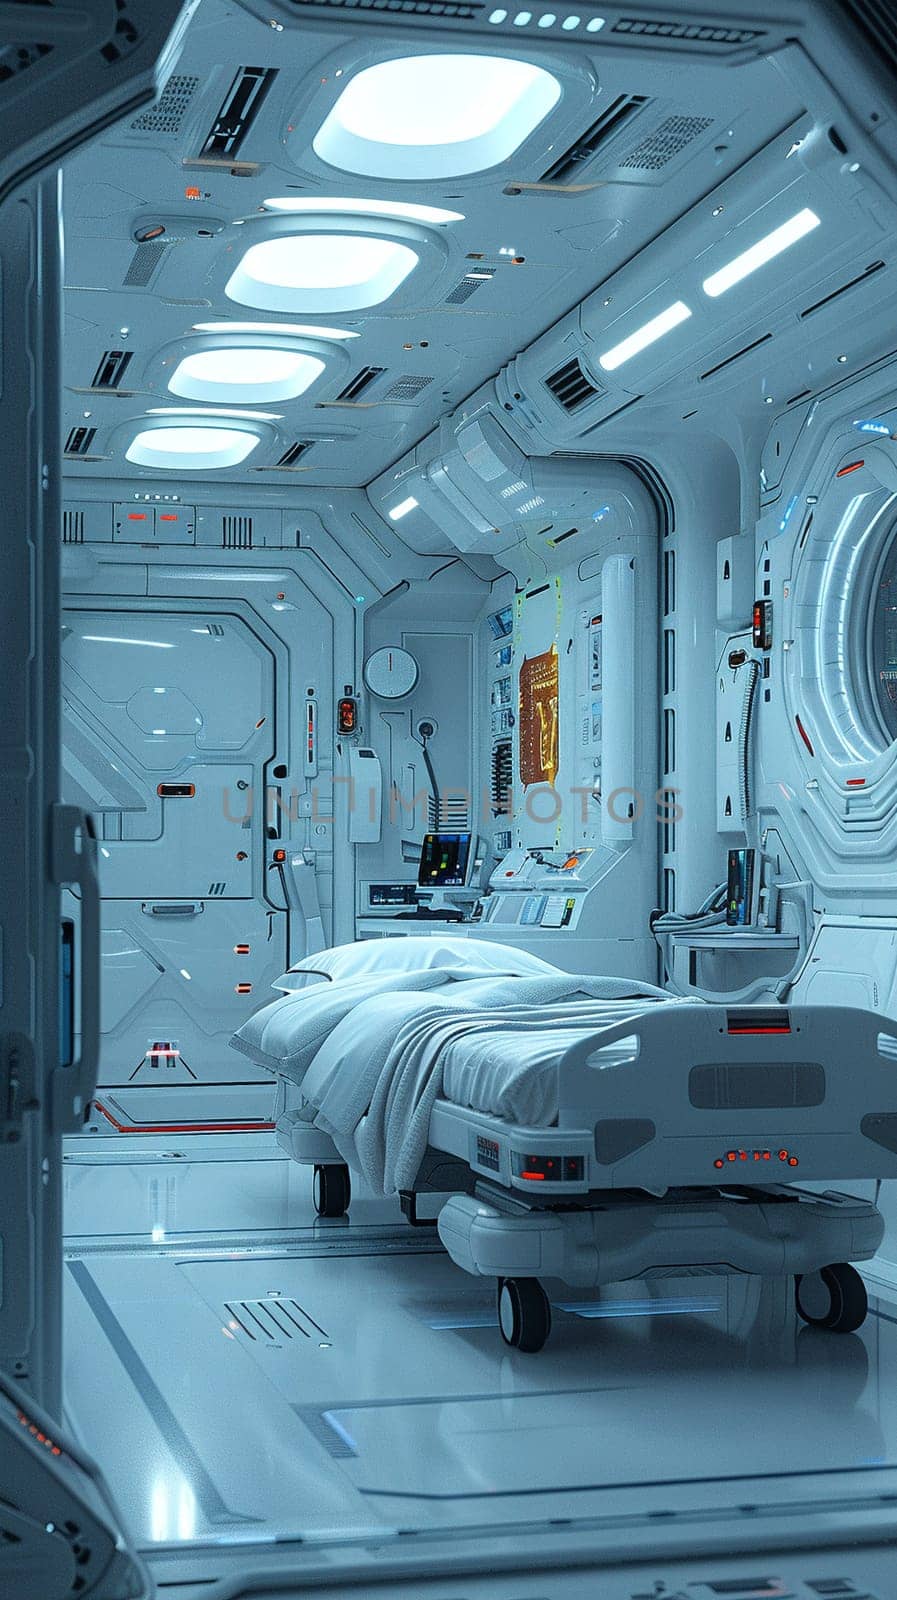 Futuristic hospital patient room with advanced medical tech and patient comfort features